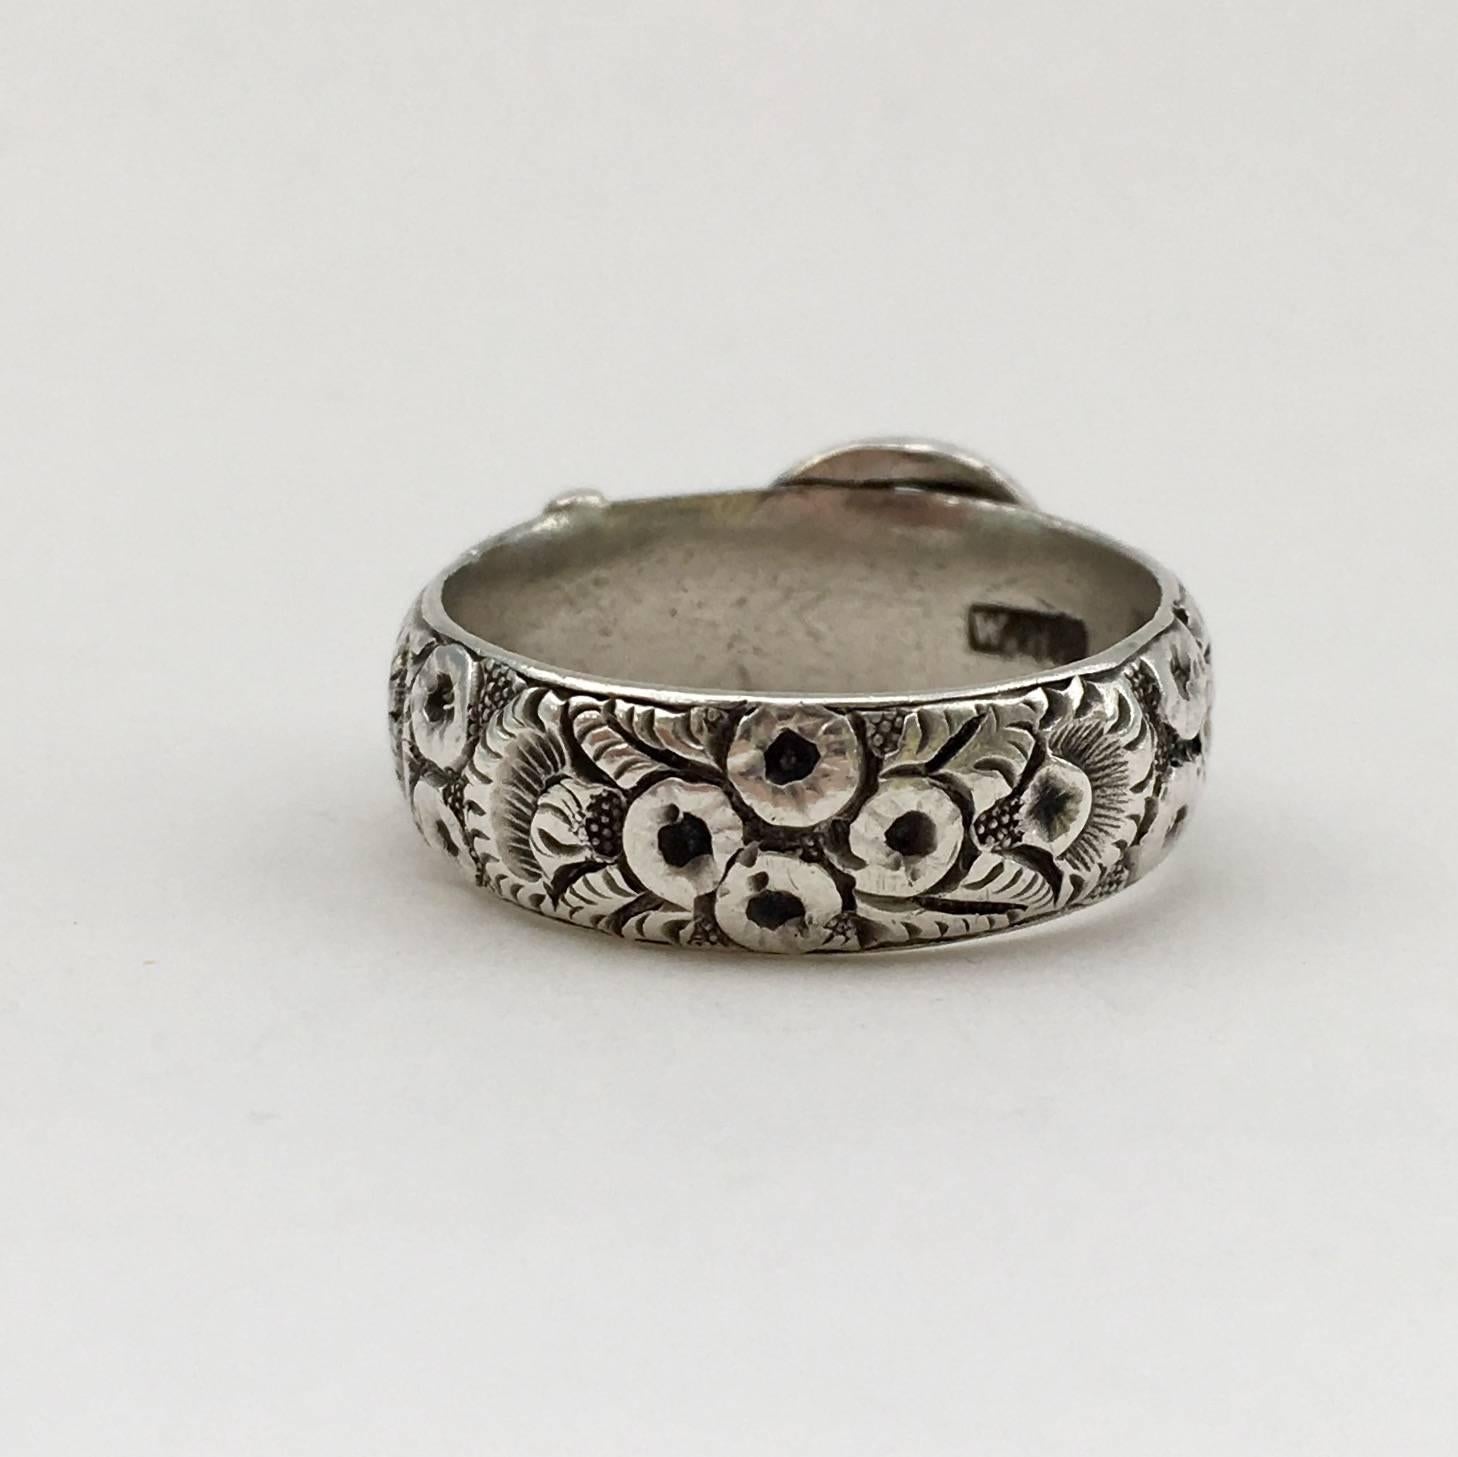 Arts and Crafts Arts & Crafts Ring Buckle Engraved Floral Heavy Silver Victorian Band